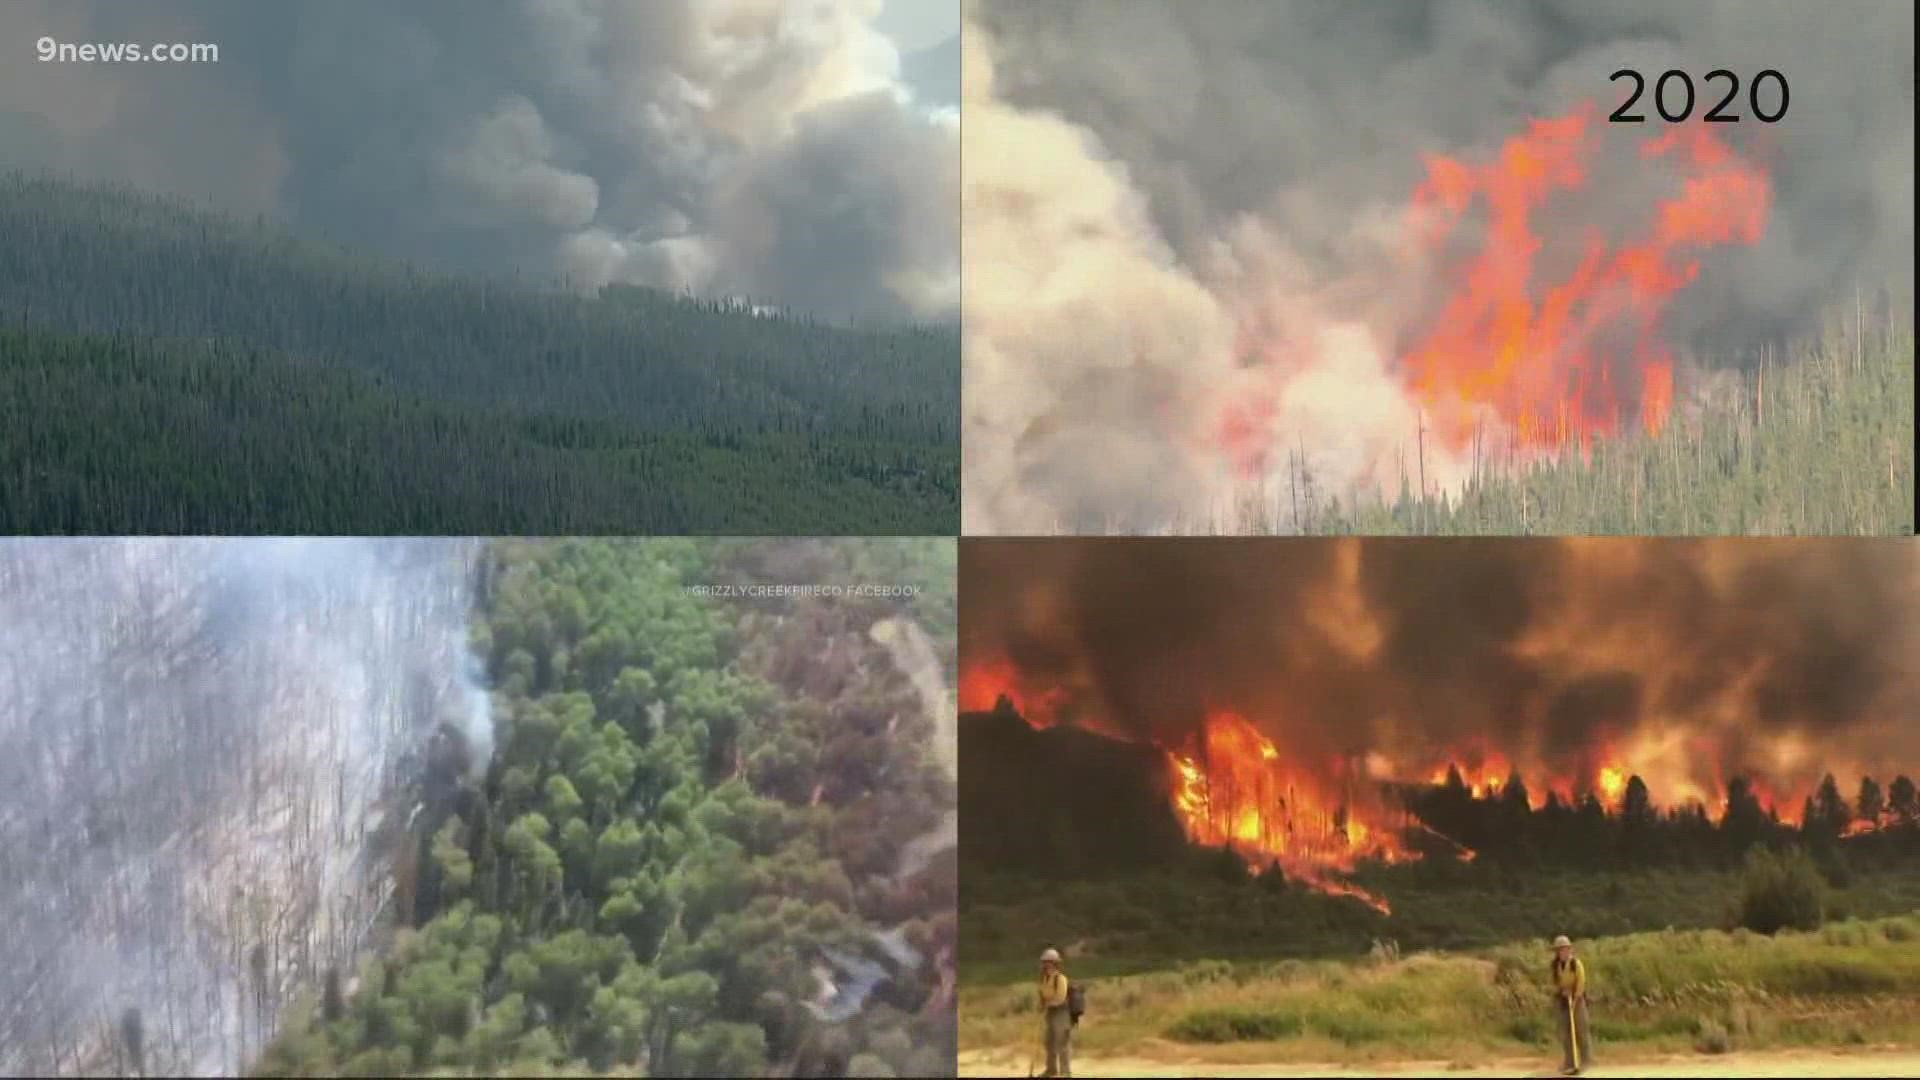 Some of the largest fires the state has ever seen were in September and October 2020.